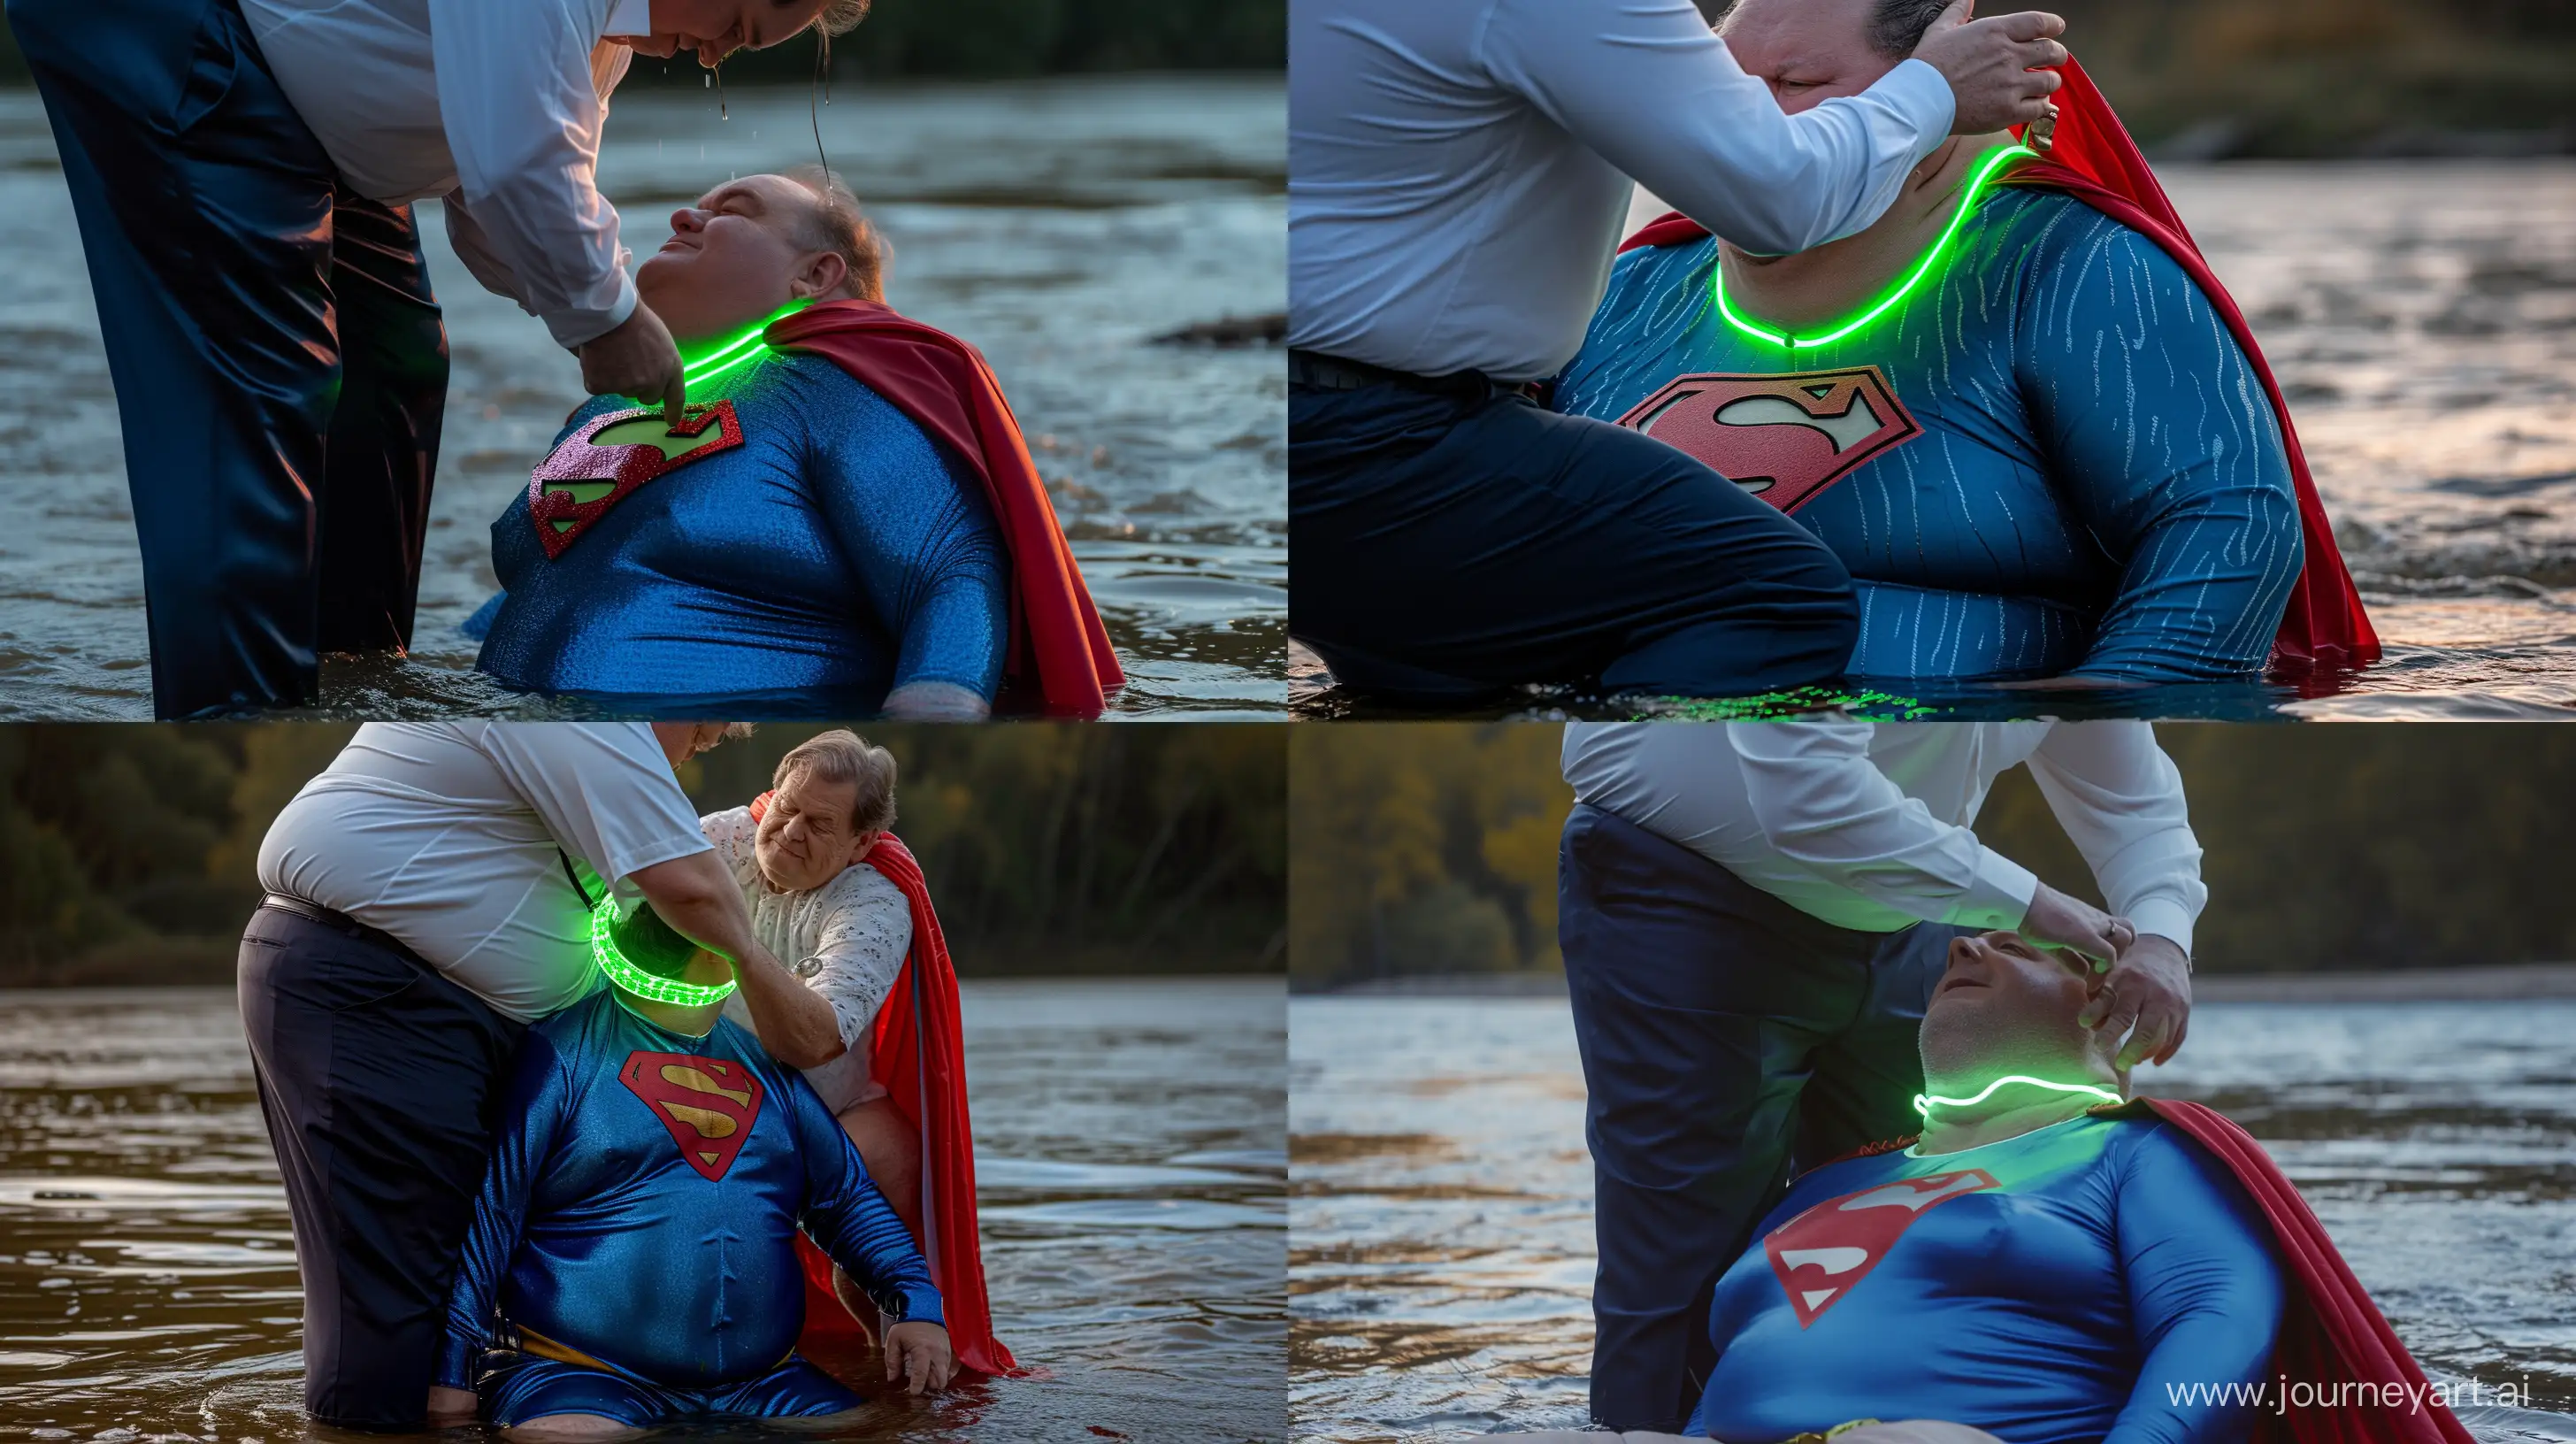 Eccentric-Scene-60YearOld-Man-in-Superman-Costume-Receives-Neon-Dog-Collar-by-the-River